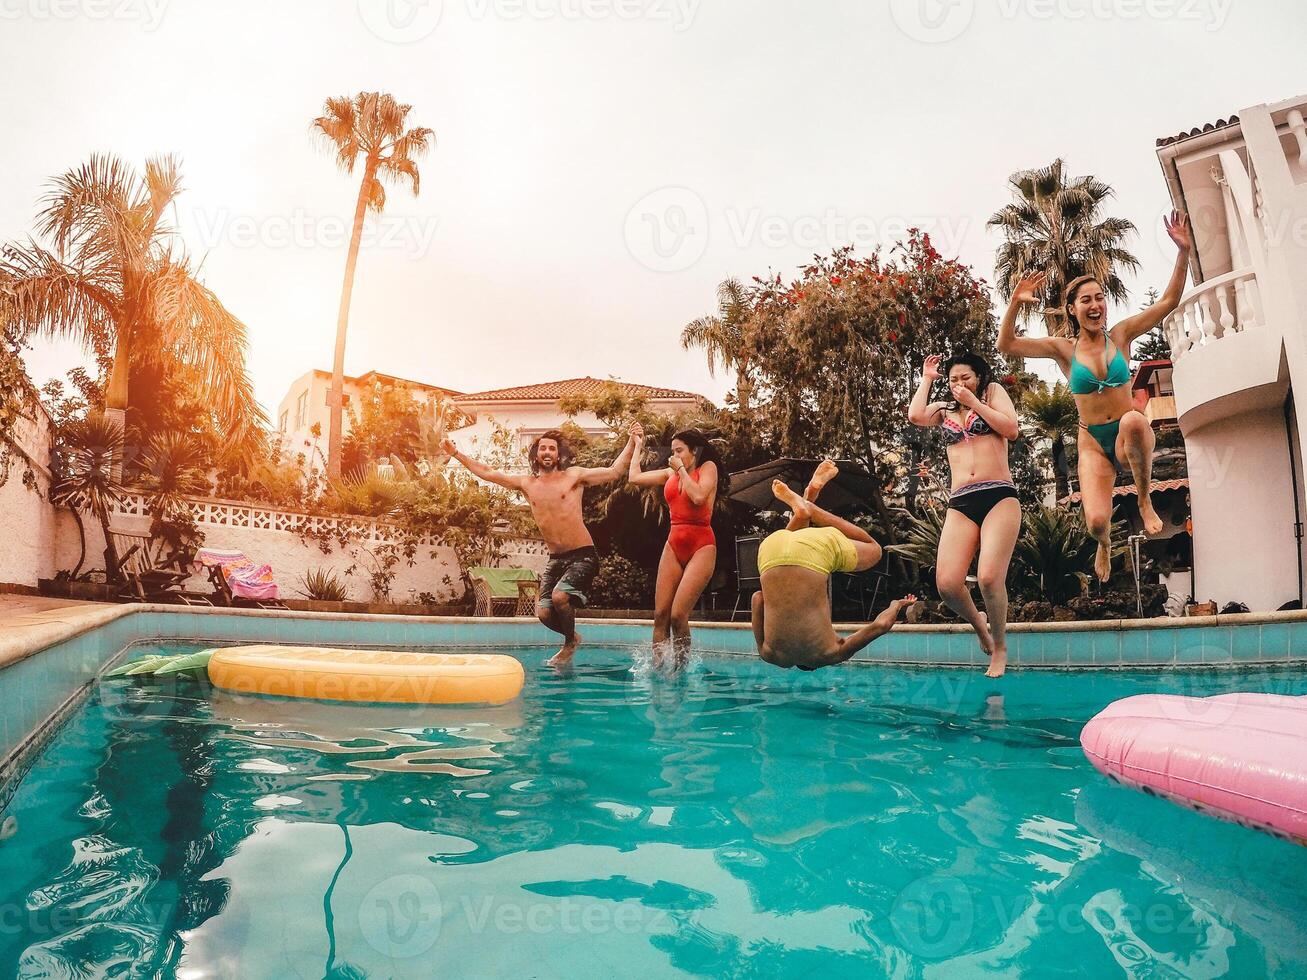 Group of happy friends jumping in pool at sunset time - Crazy young people having fun making party in exclusive tropical house - Holidays, summer, vacation and youth lifestyle concept photo